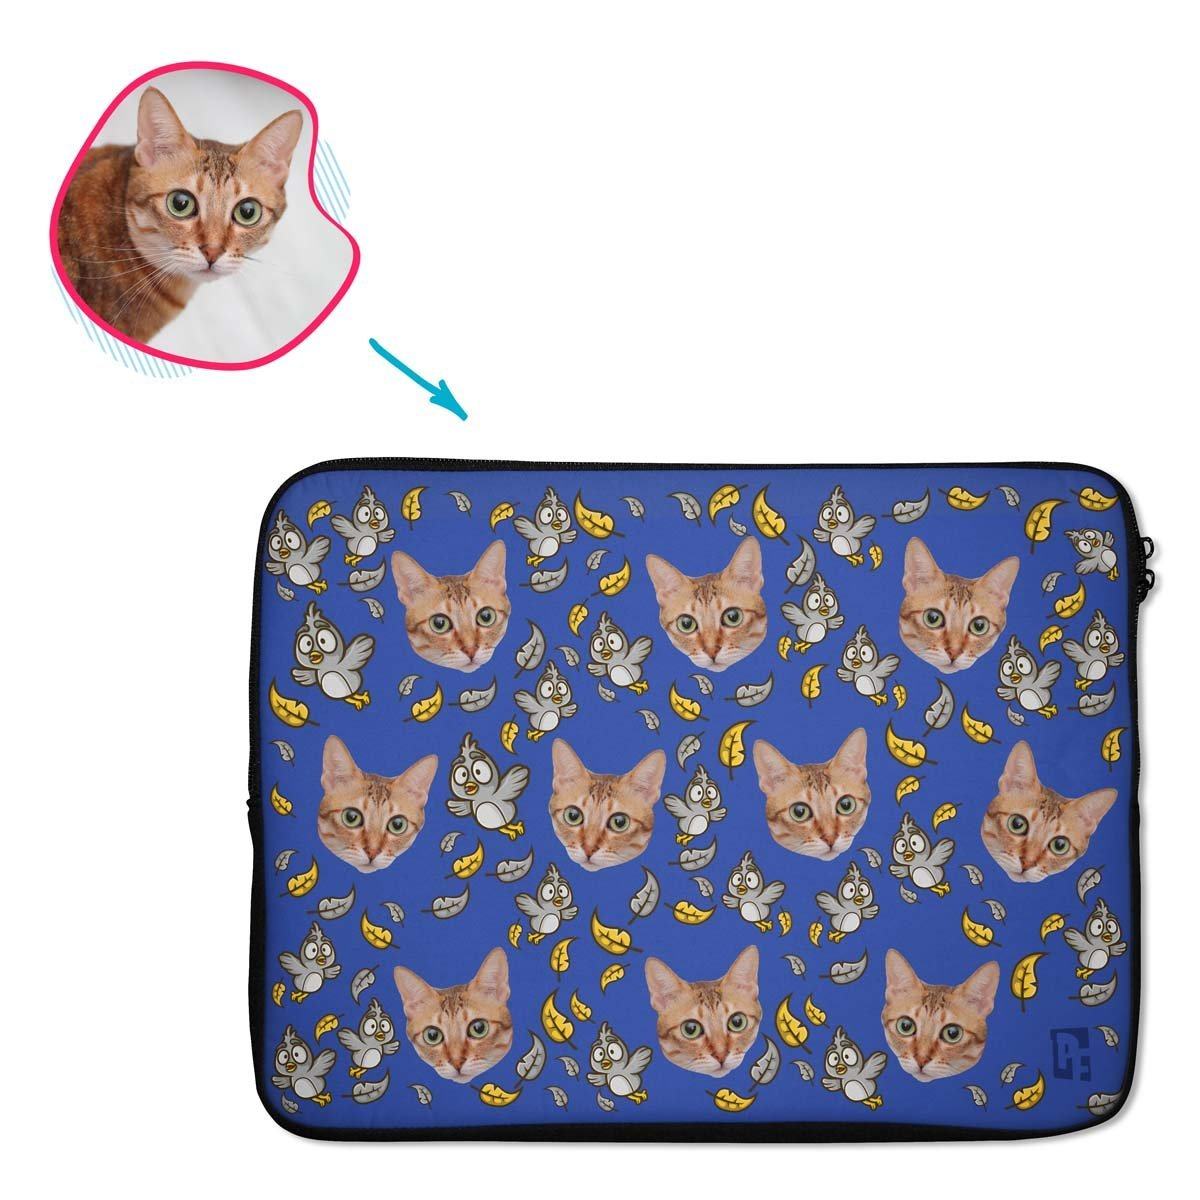 darkblue Bird laptop sleeve personalized with photo of face printed on them